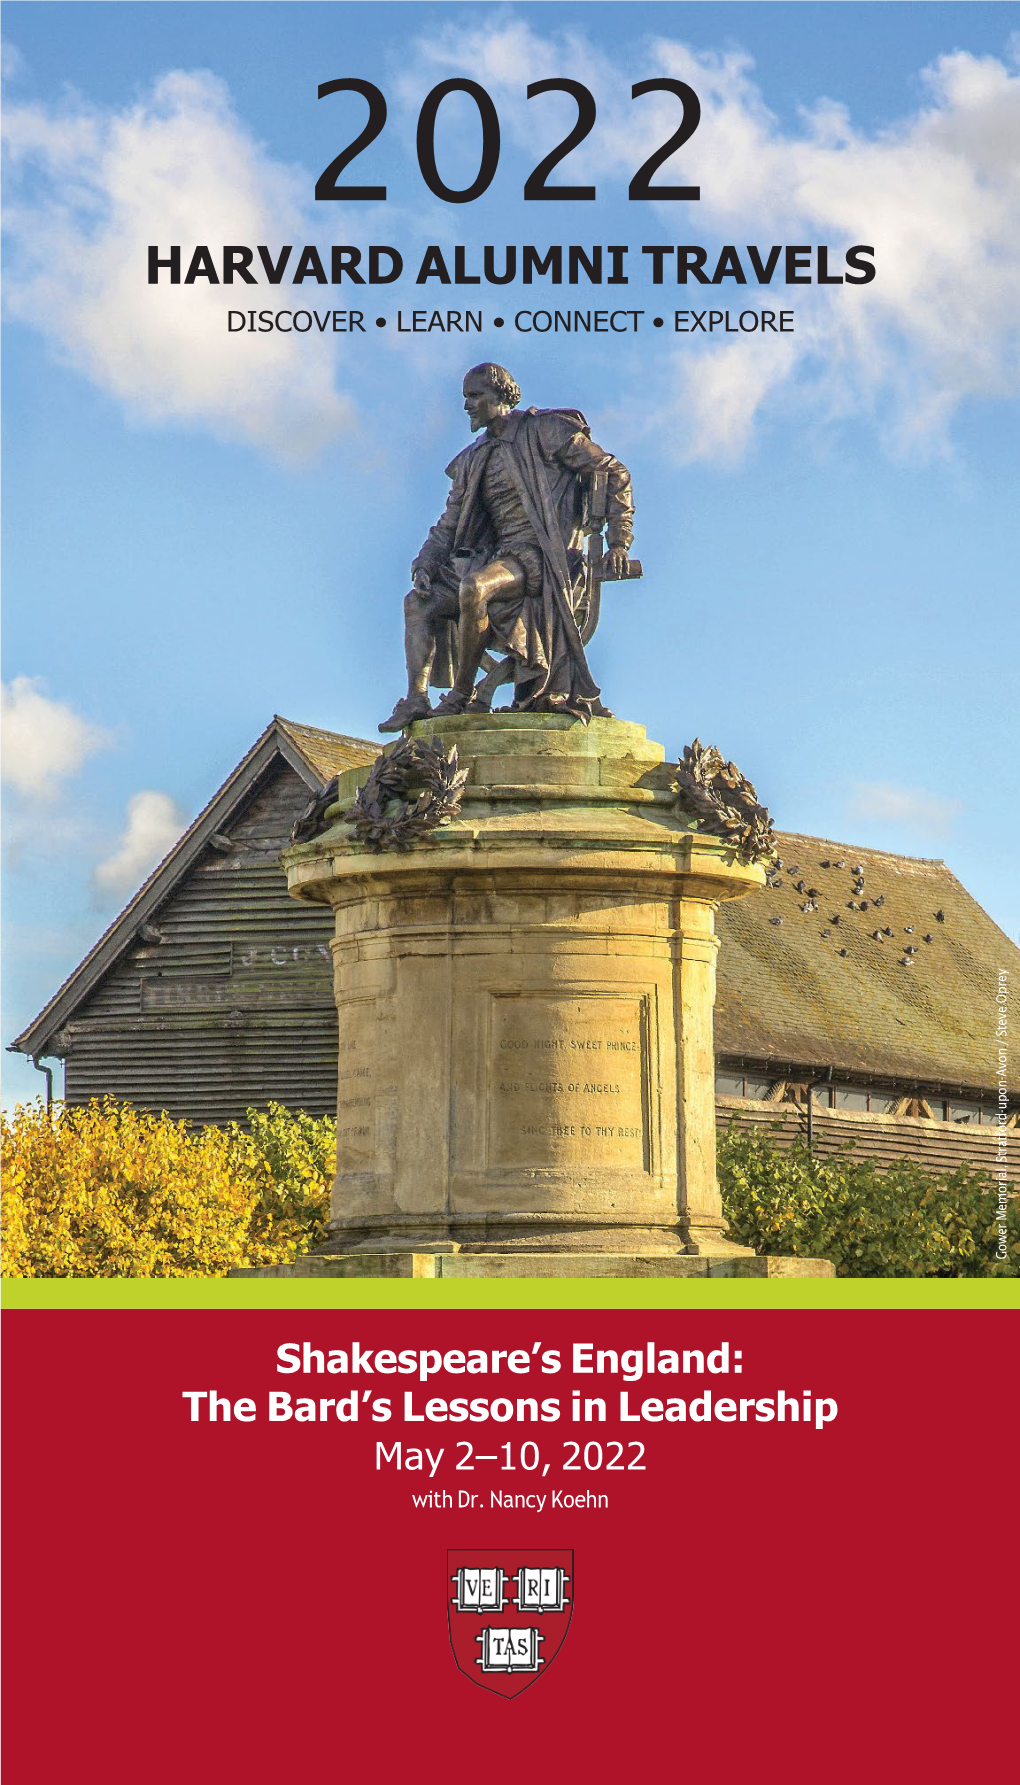 Shakespeare's England: the Bard's Lessons in Leadership